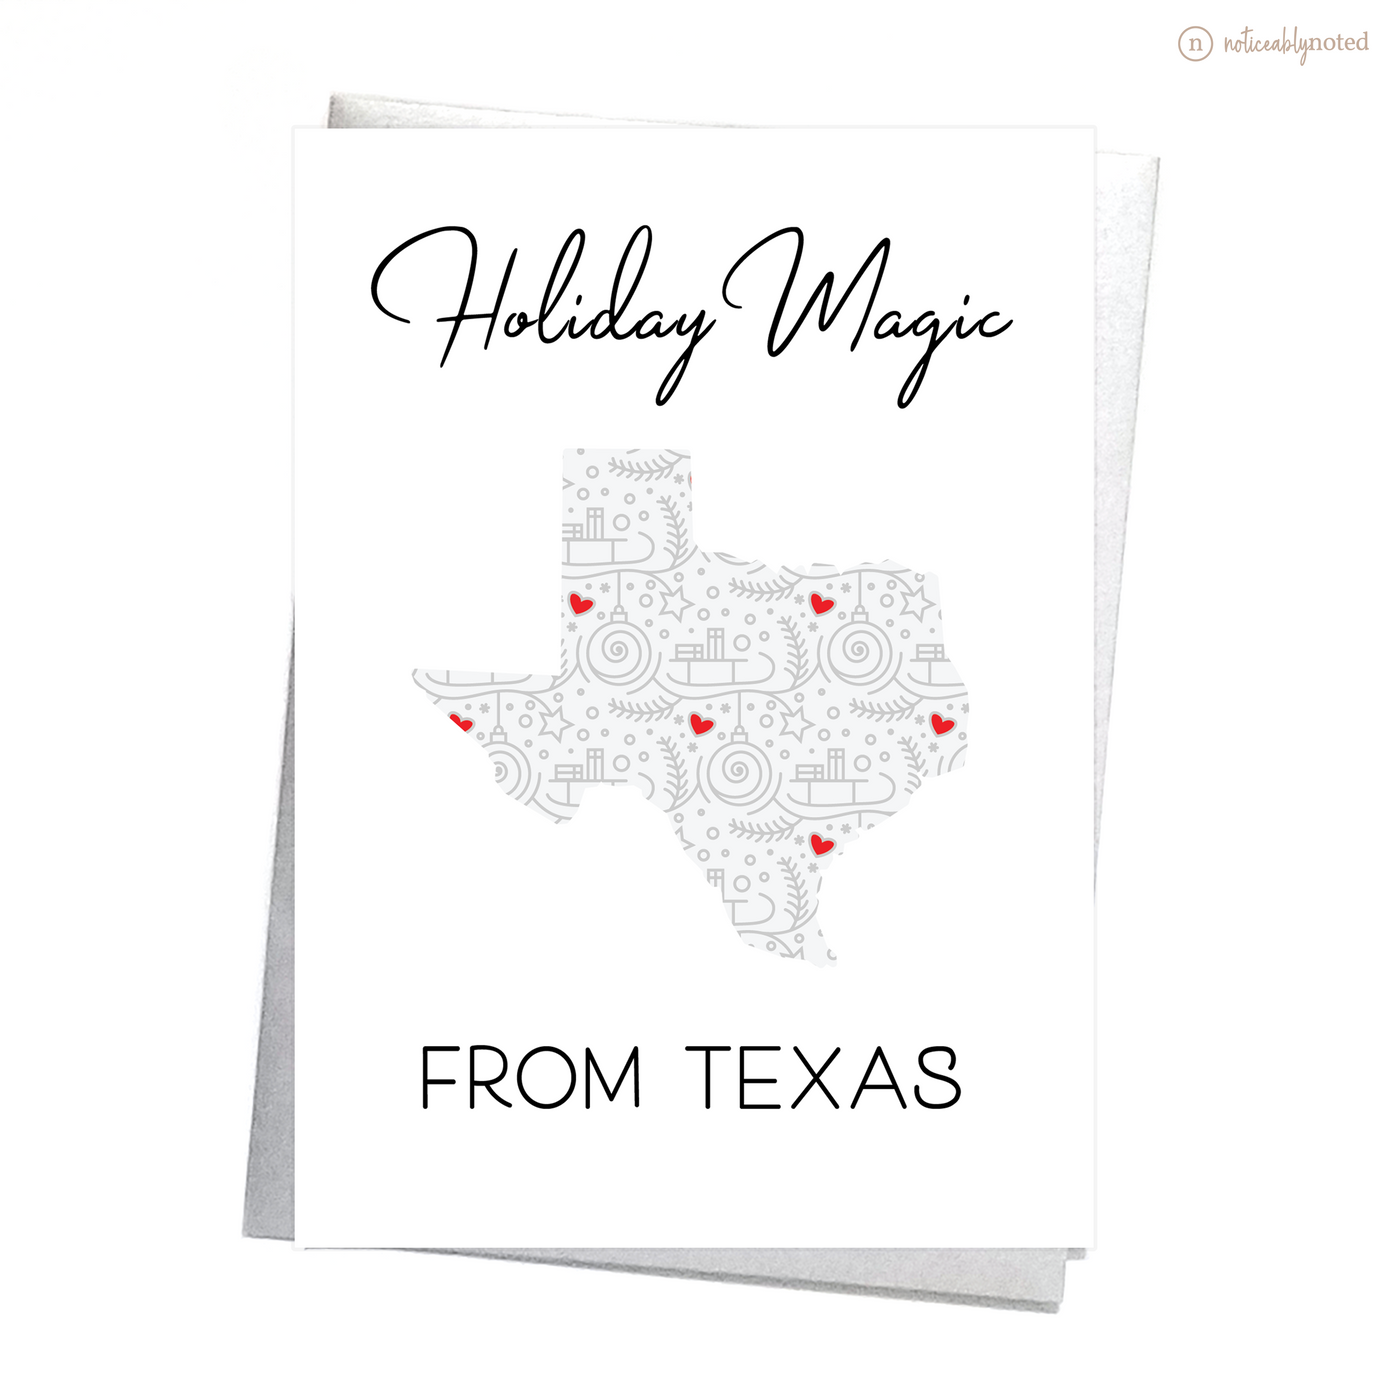 Texas Christmas Card - Holiday Magic | Noticeably Noted